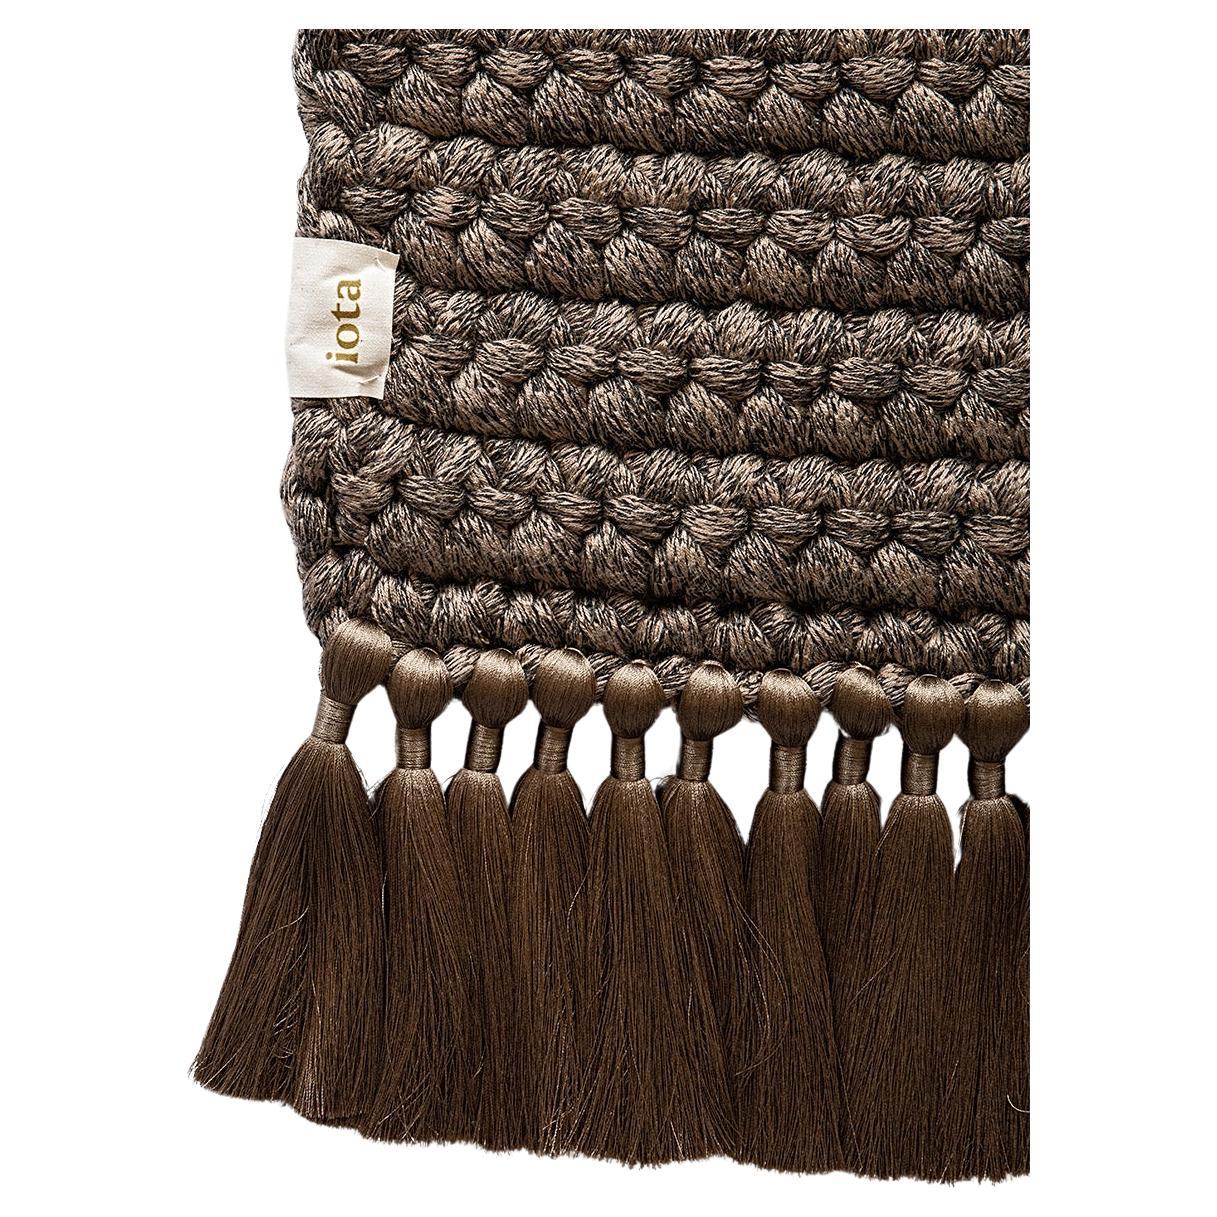 Handmade Crochet 200x300 cm Thick Rug in Cacao Black with Tassels For Sale